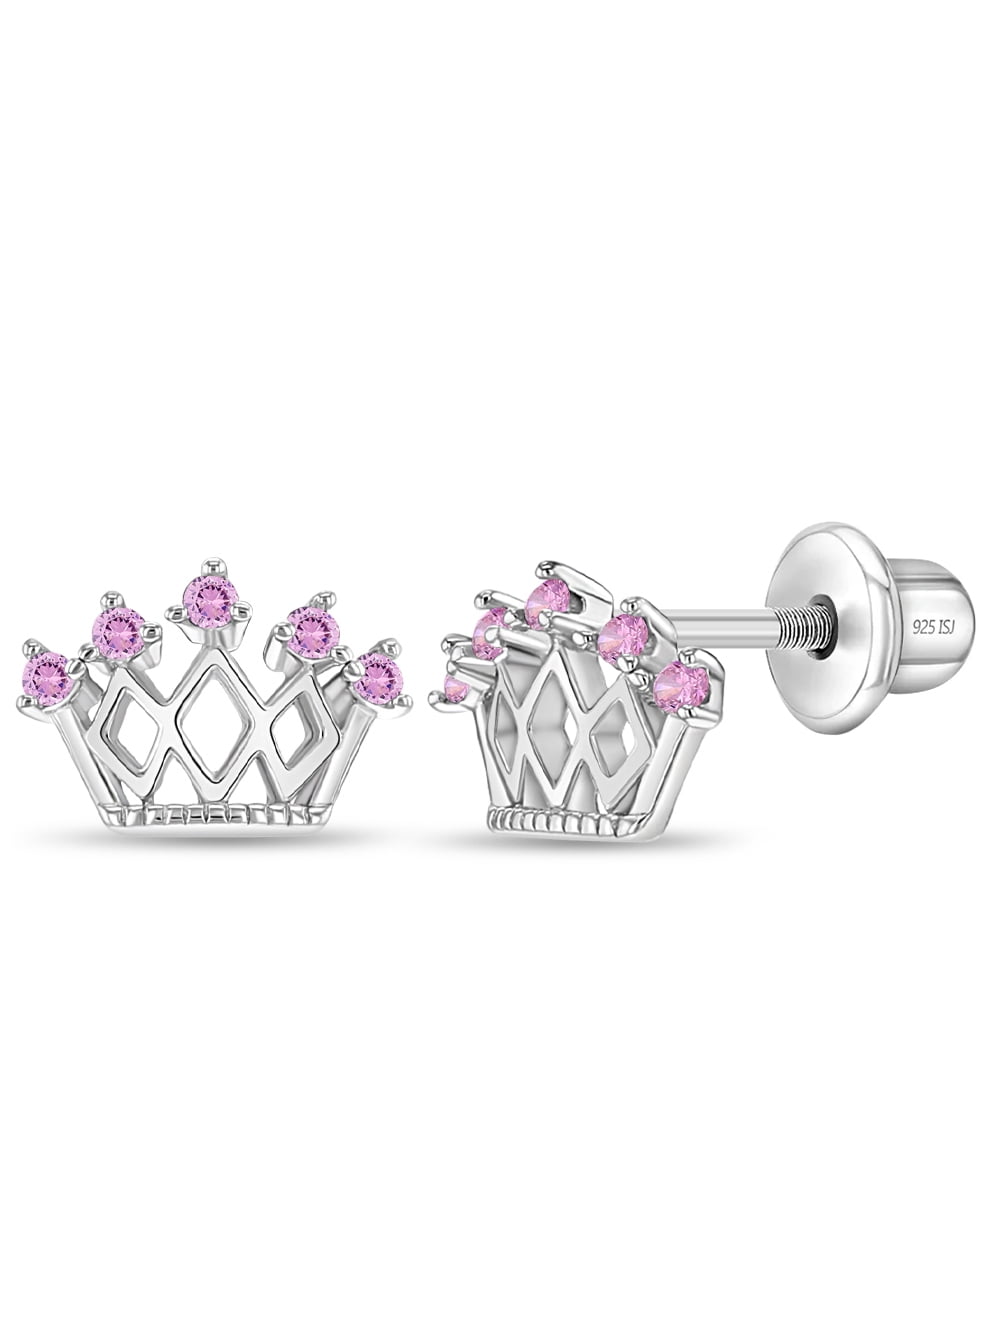 925 Sterling Silver Princess Crown CZ Screw Back Earrings Toddlers Young  Girls 